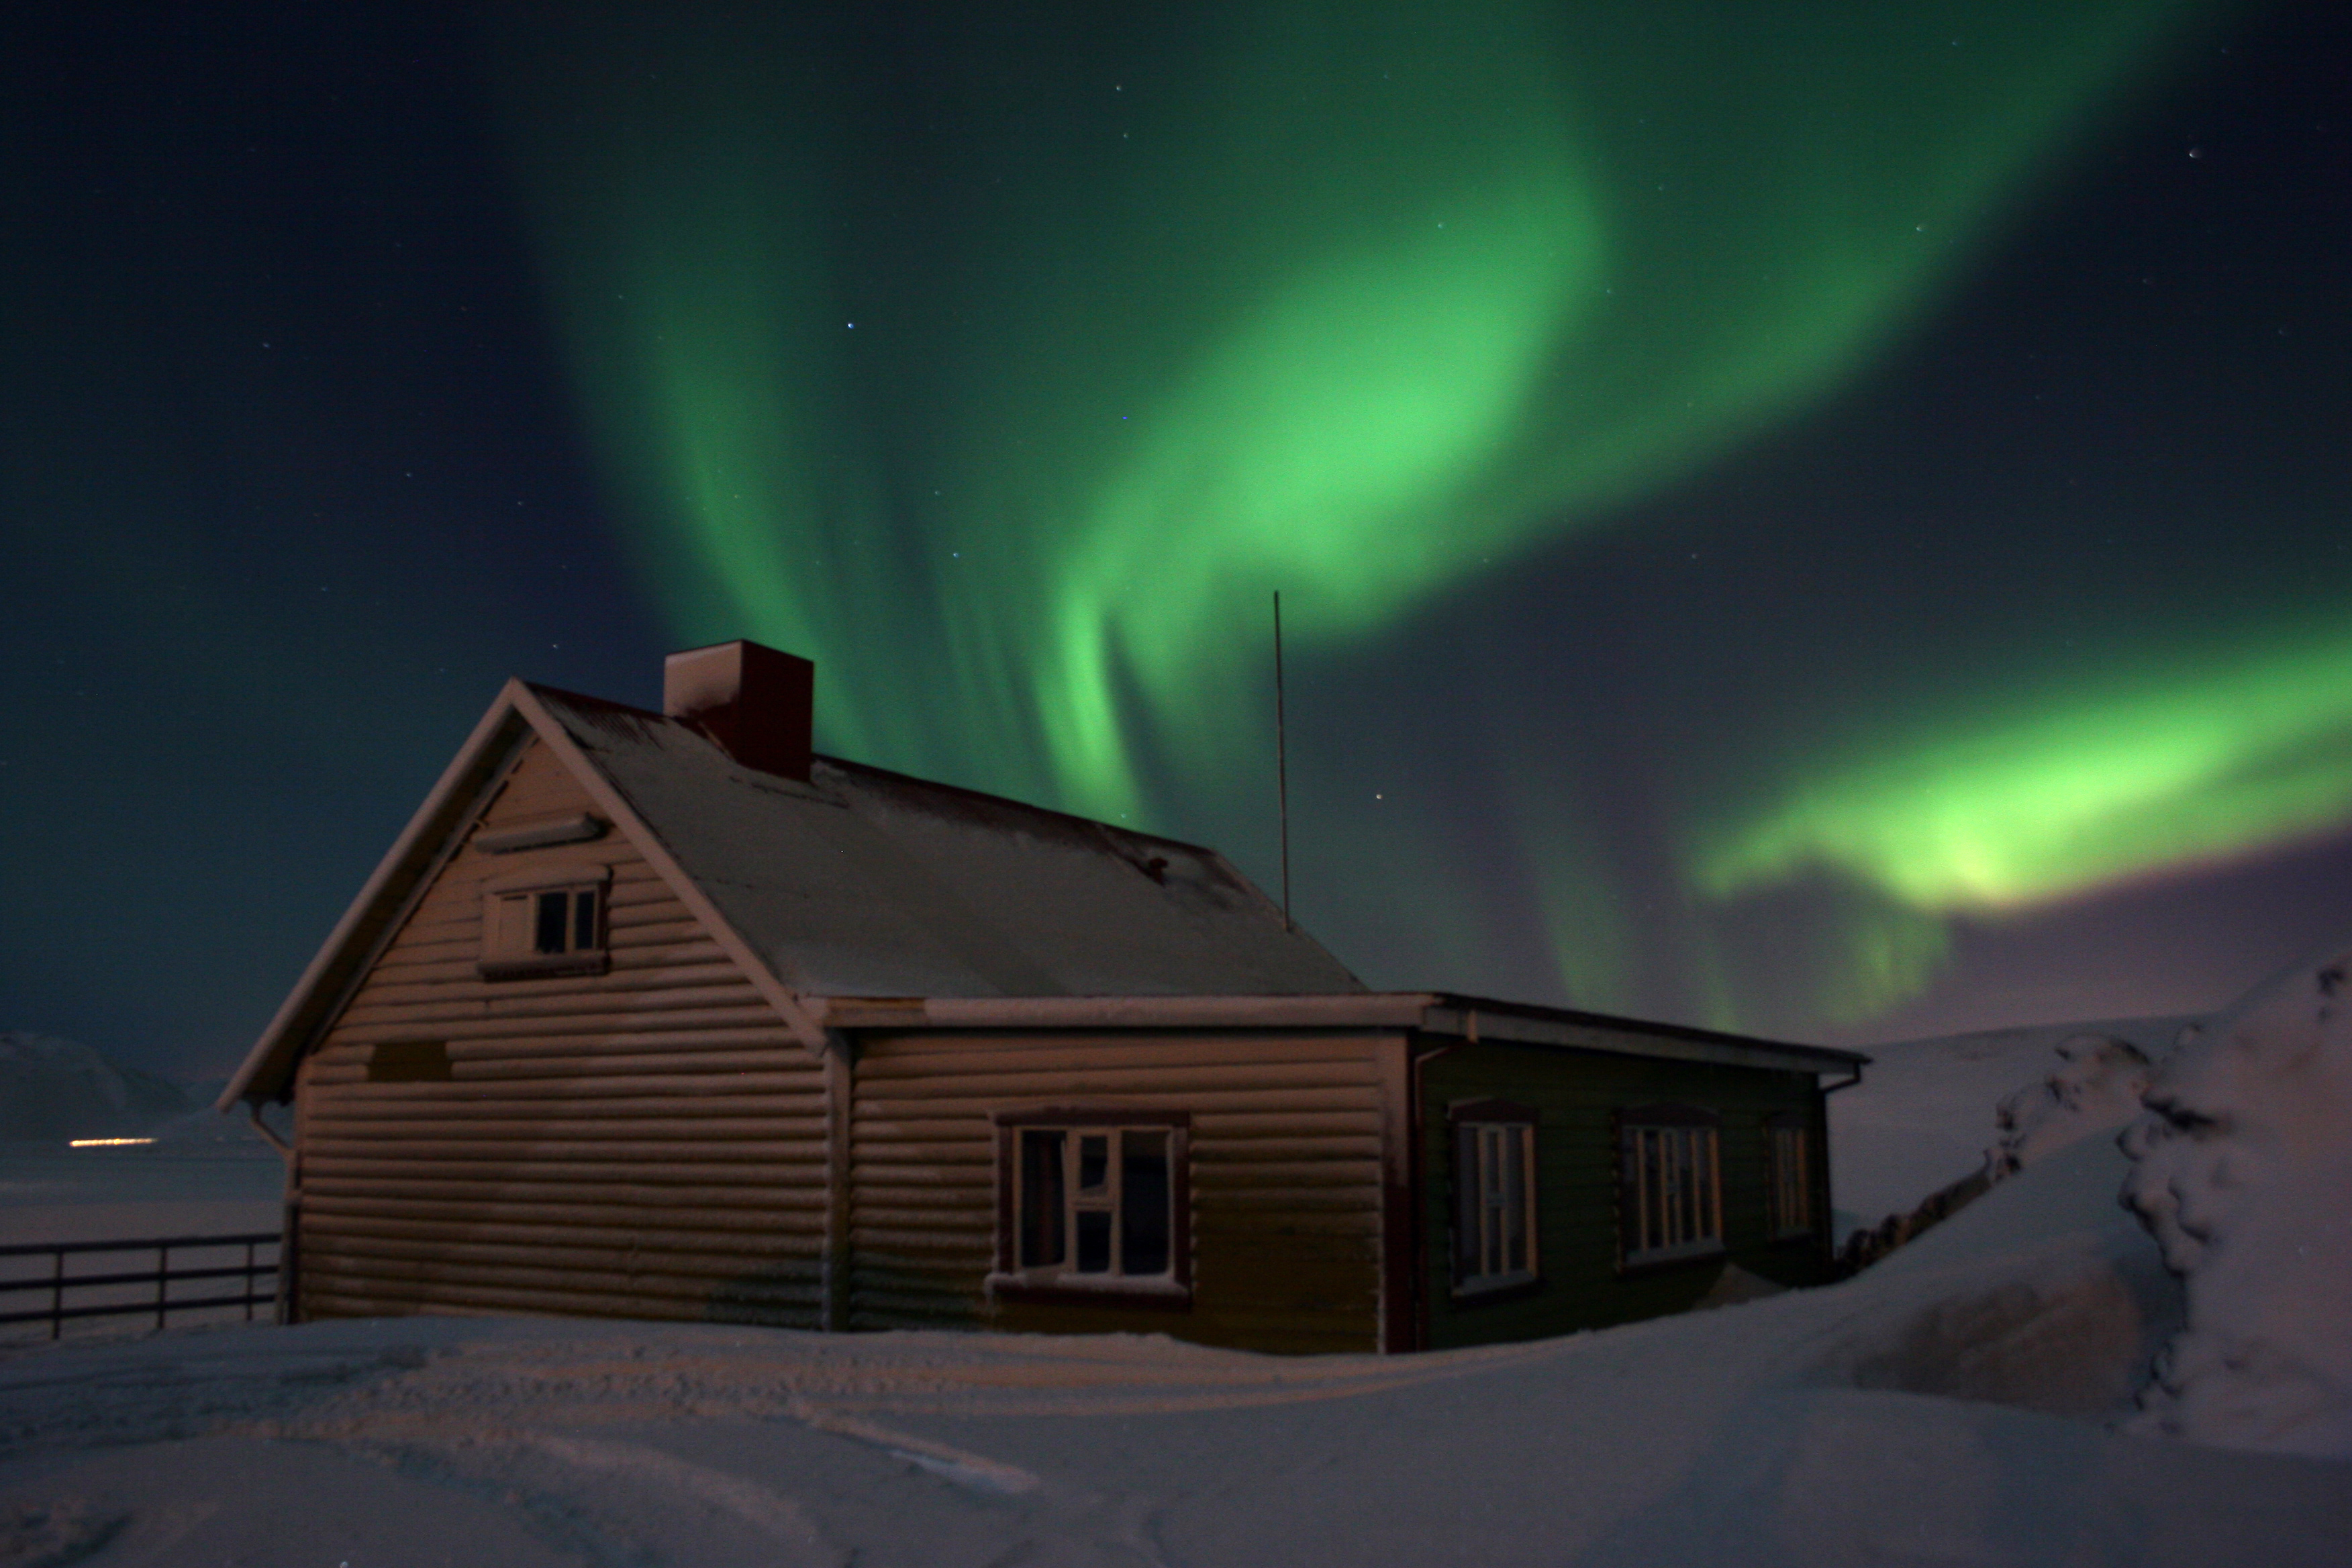 The aurora borealis dancing over a countryside cottage.